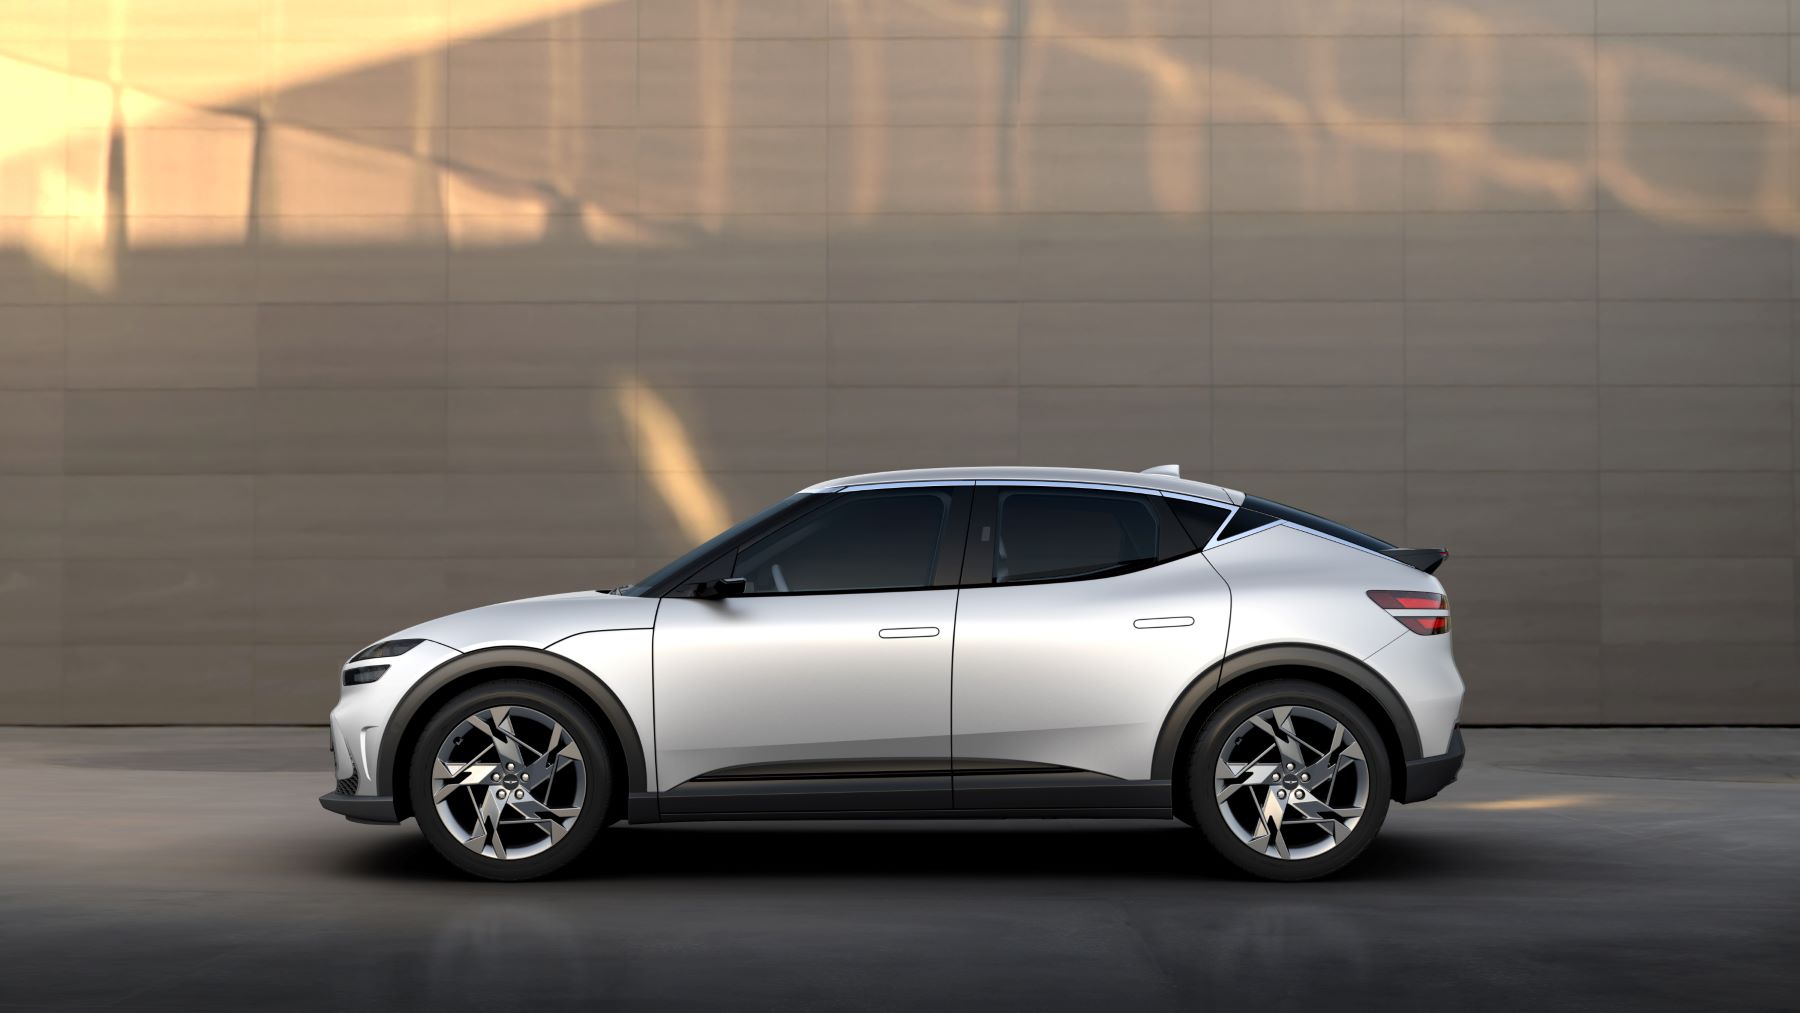 A side profile and promotion shot of the Genesis GV60 compact electric SUV